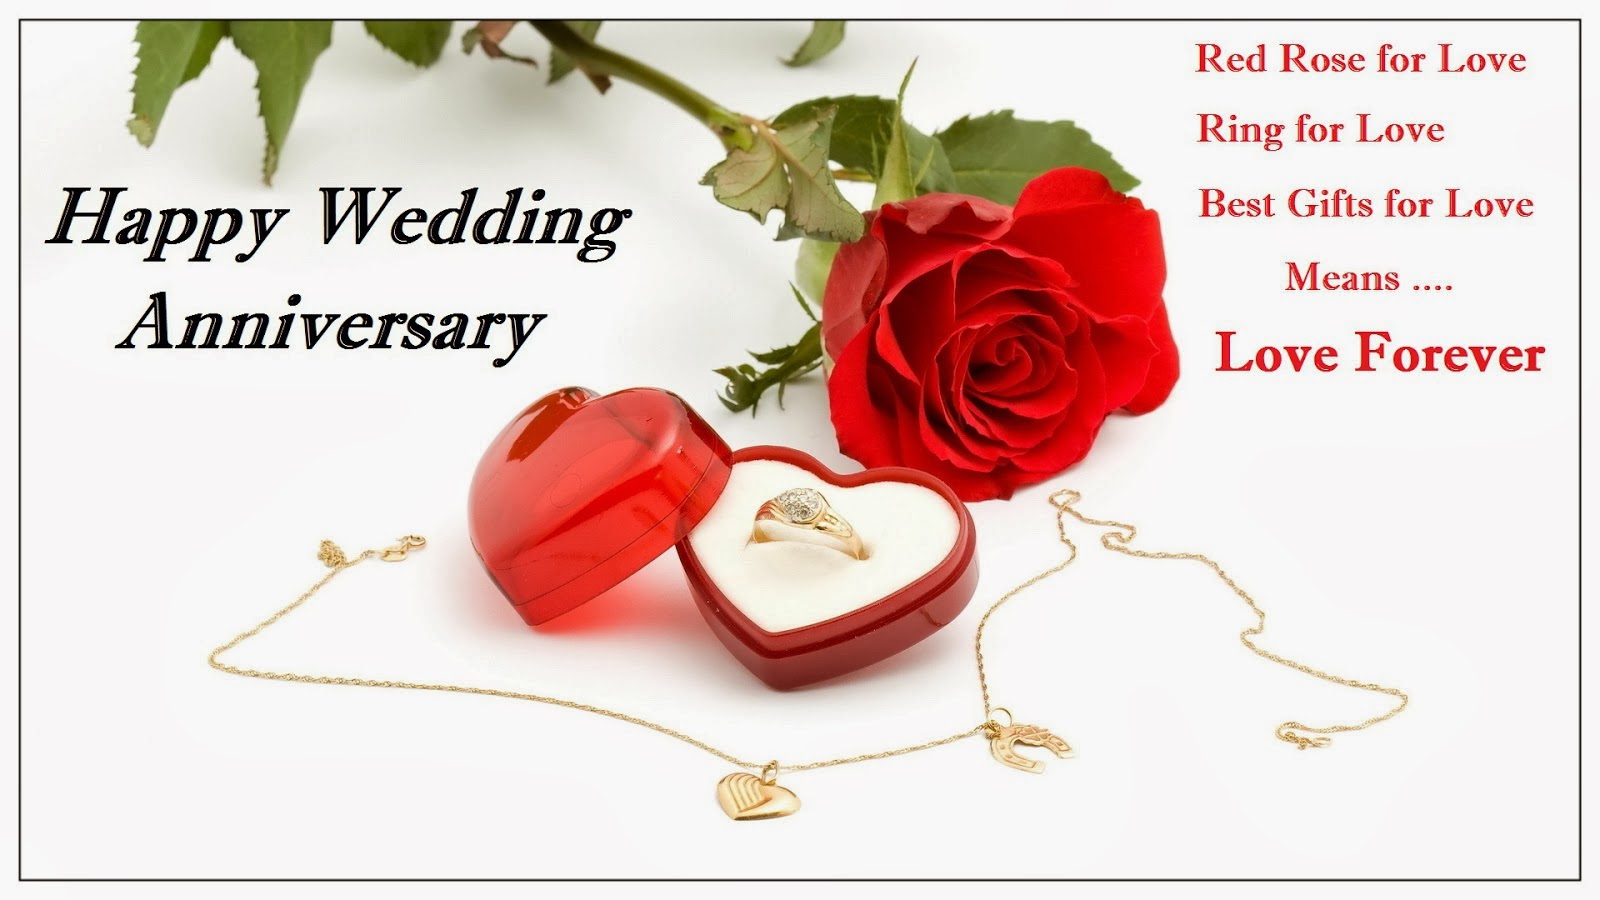 This Is Quotations Pictures About Happy Wedding Anniversary Red Rose